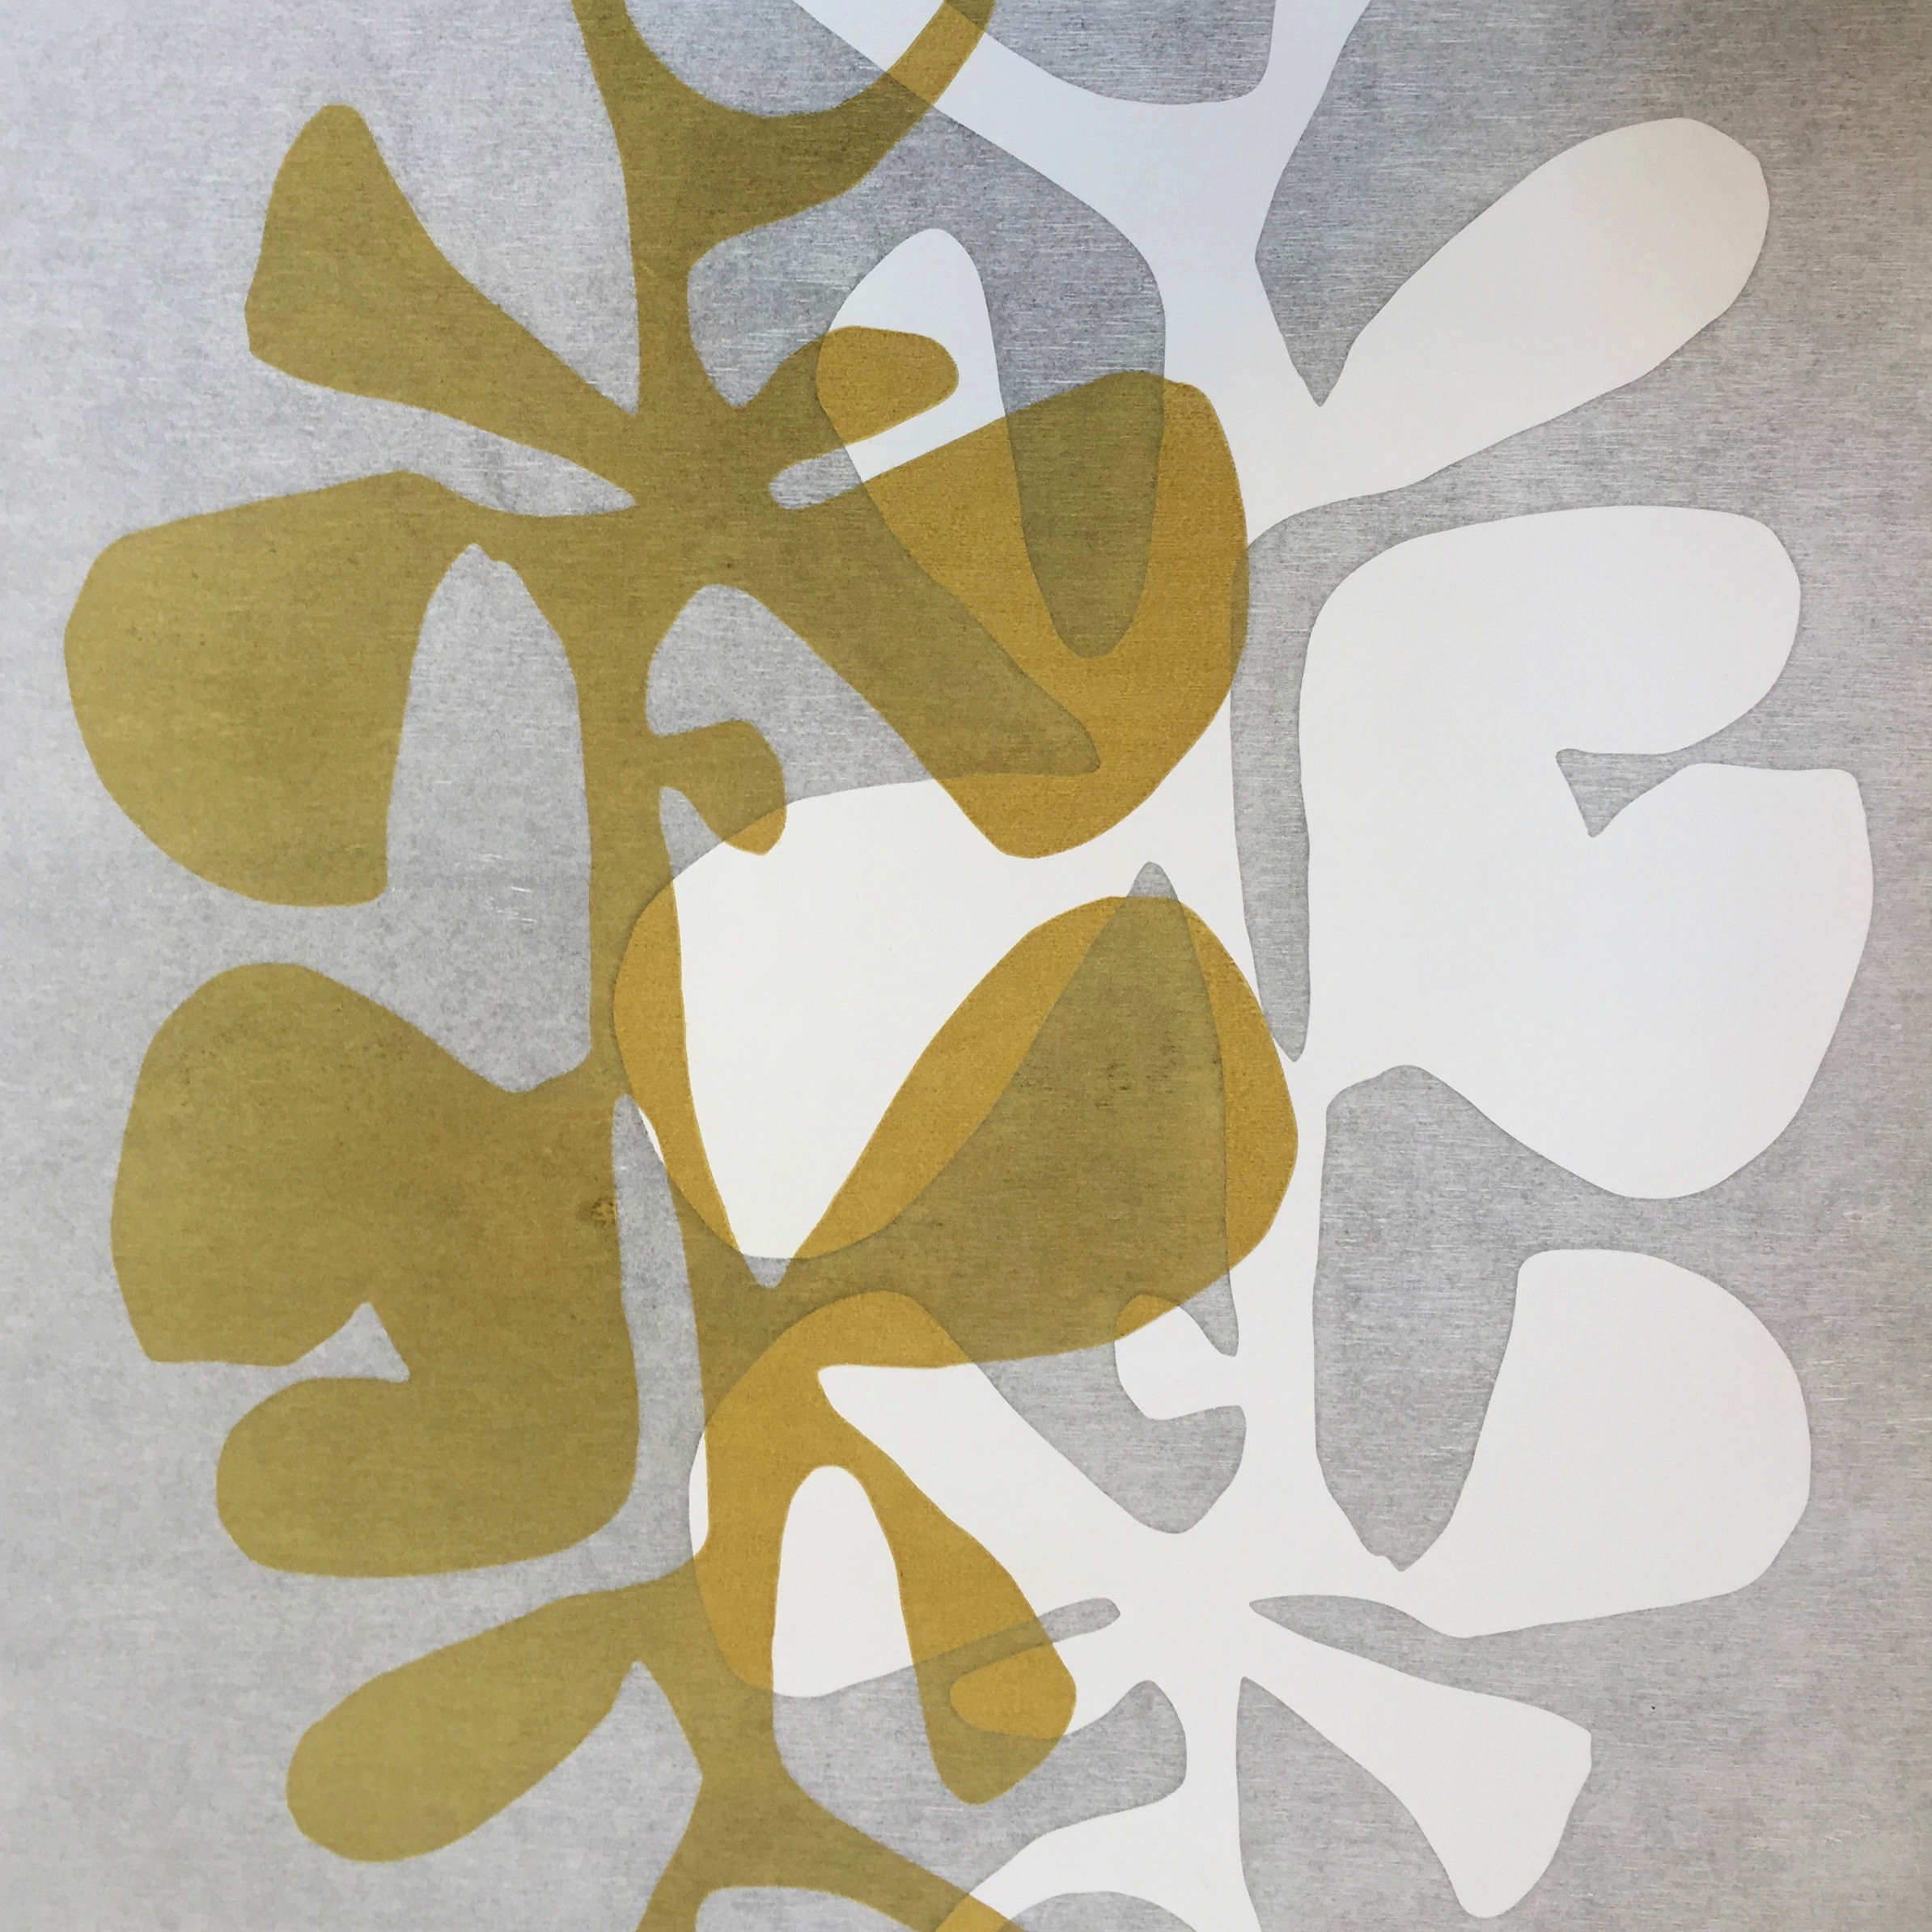 Bauhaus Botanical - Gold/Pale Grey/White: created by Monica Monaghan-Milstein for MonicaArts Design LLC